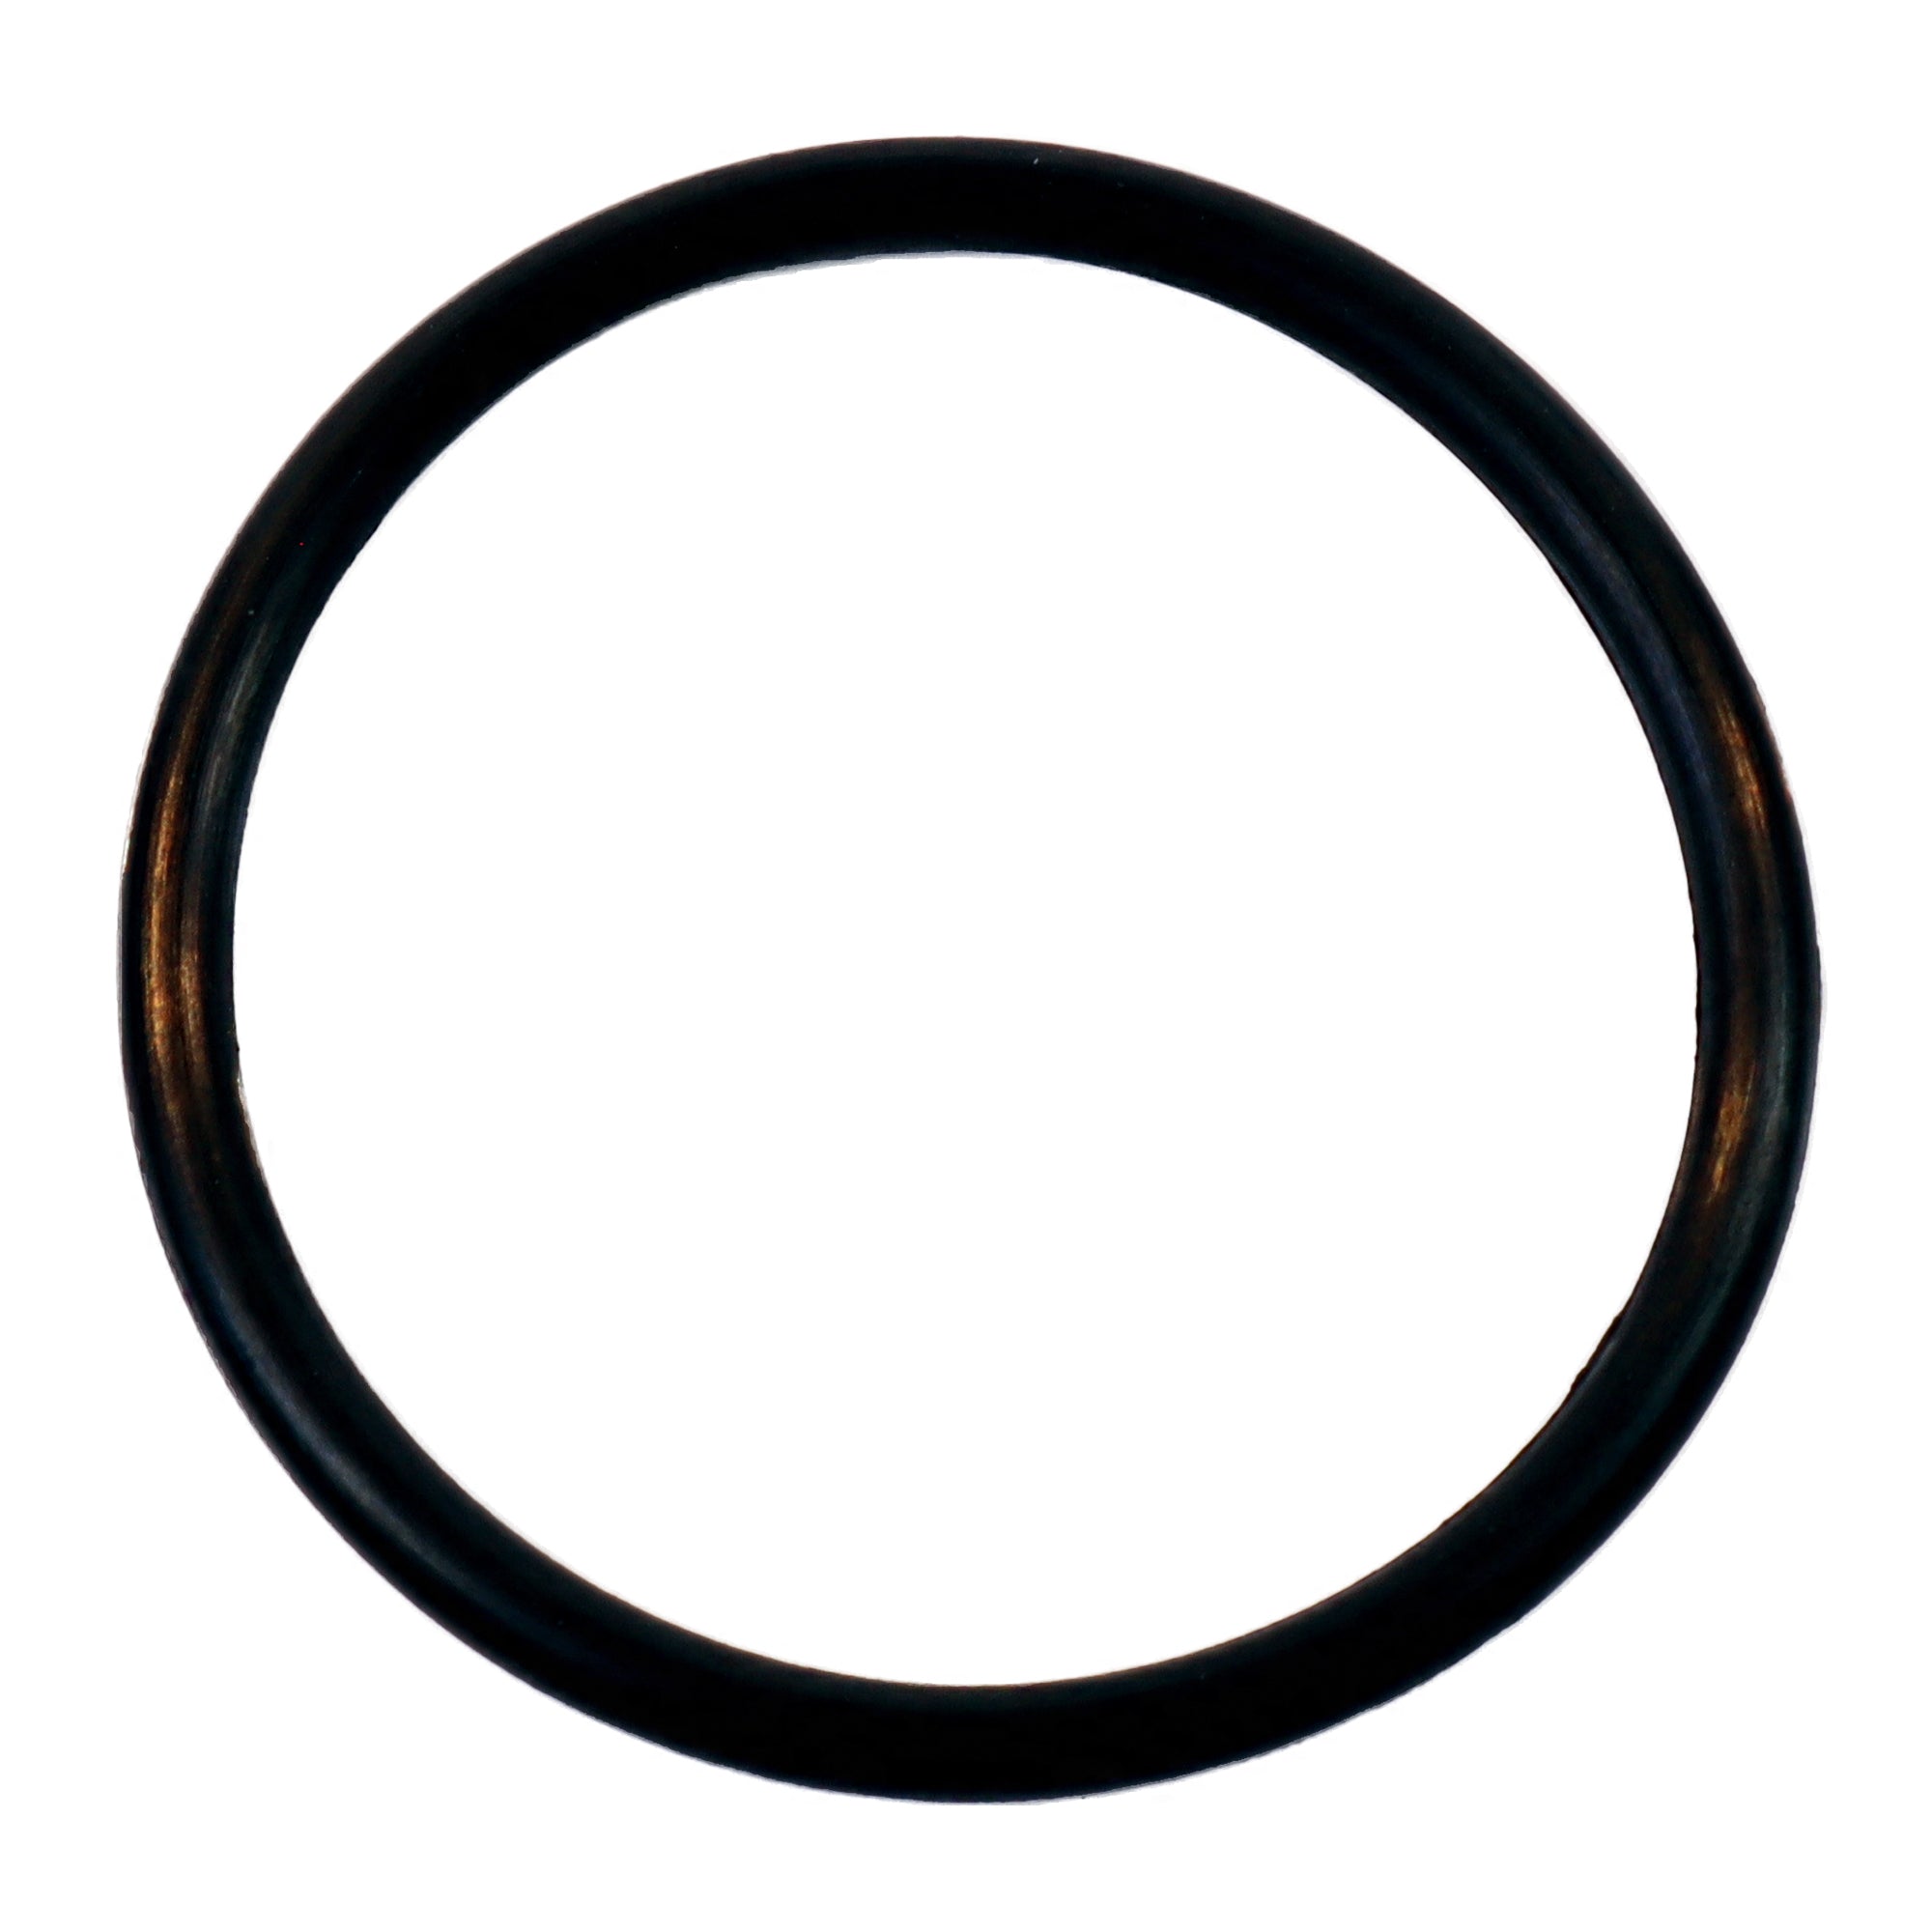 0702 - Replacement O-Ring for 1102 Adapter